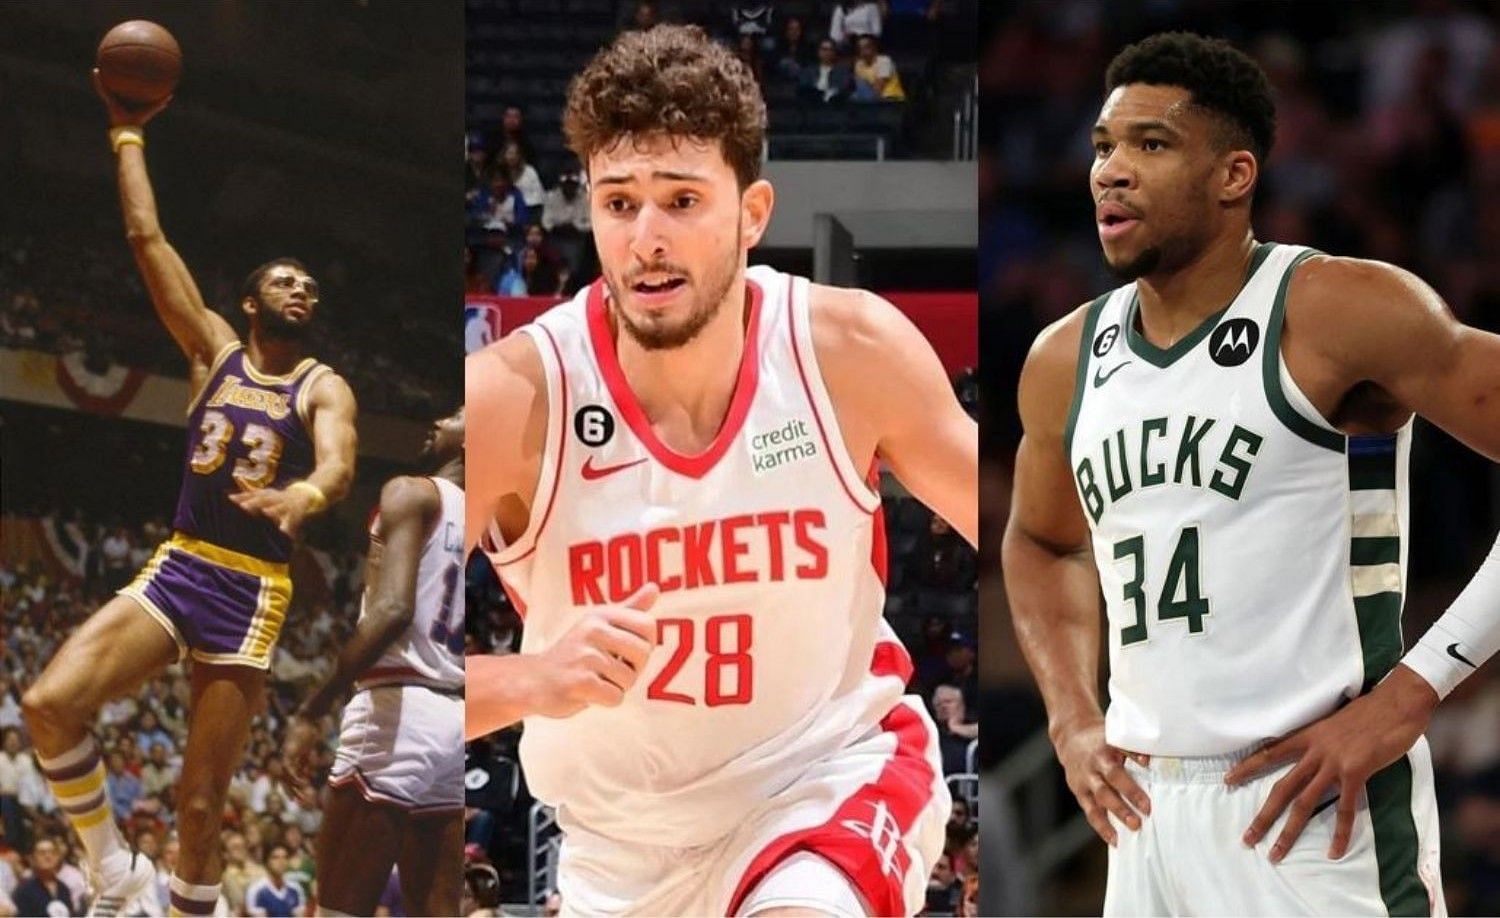 Houston Rockets center Alperen Sengun (C) is on track to eclipse the record once set by Giannis Antetokounmpo (R) and Kareem Abdul-Jabbar (L).